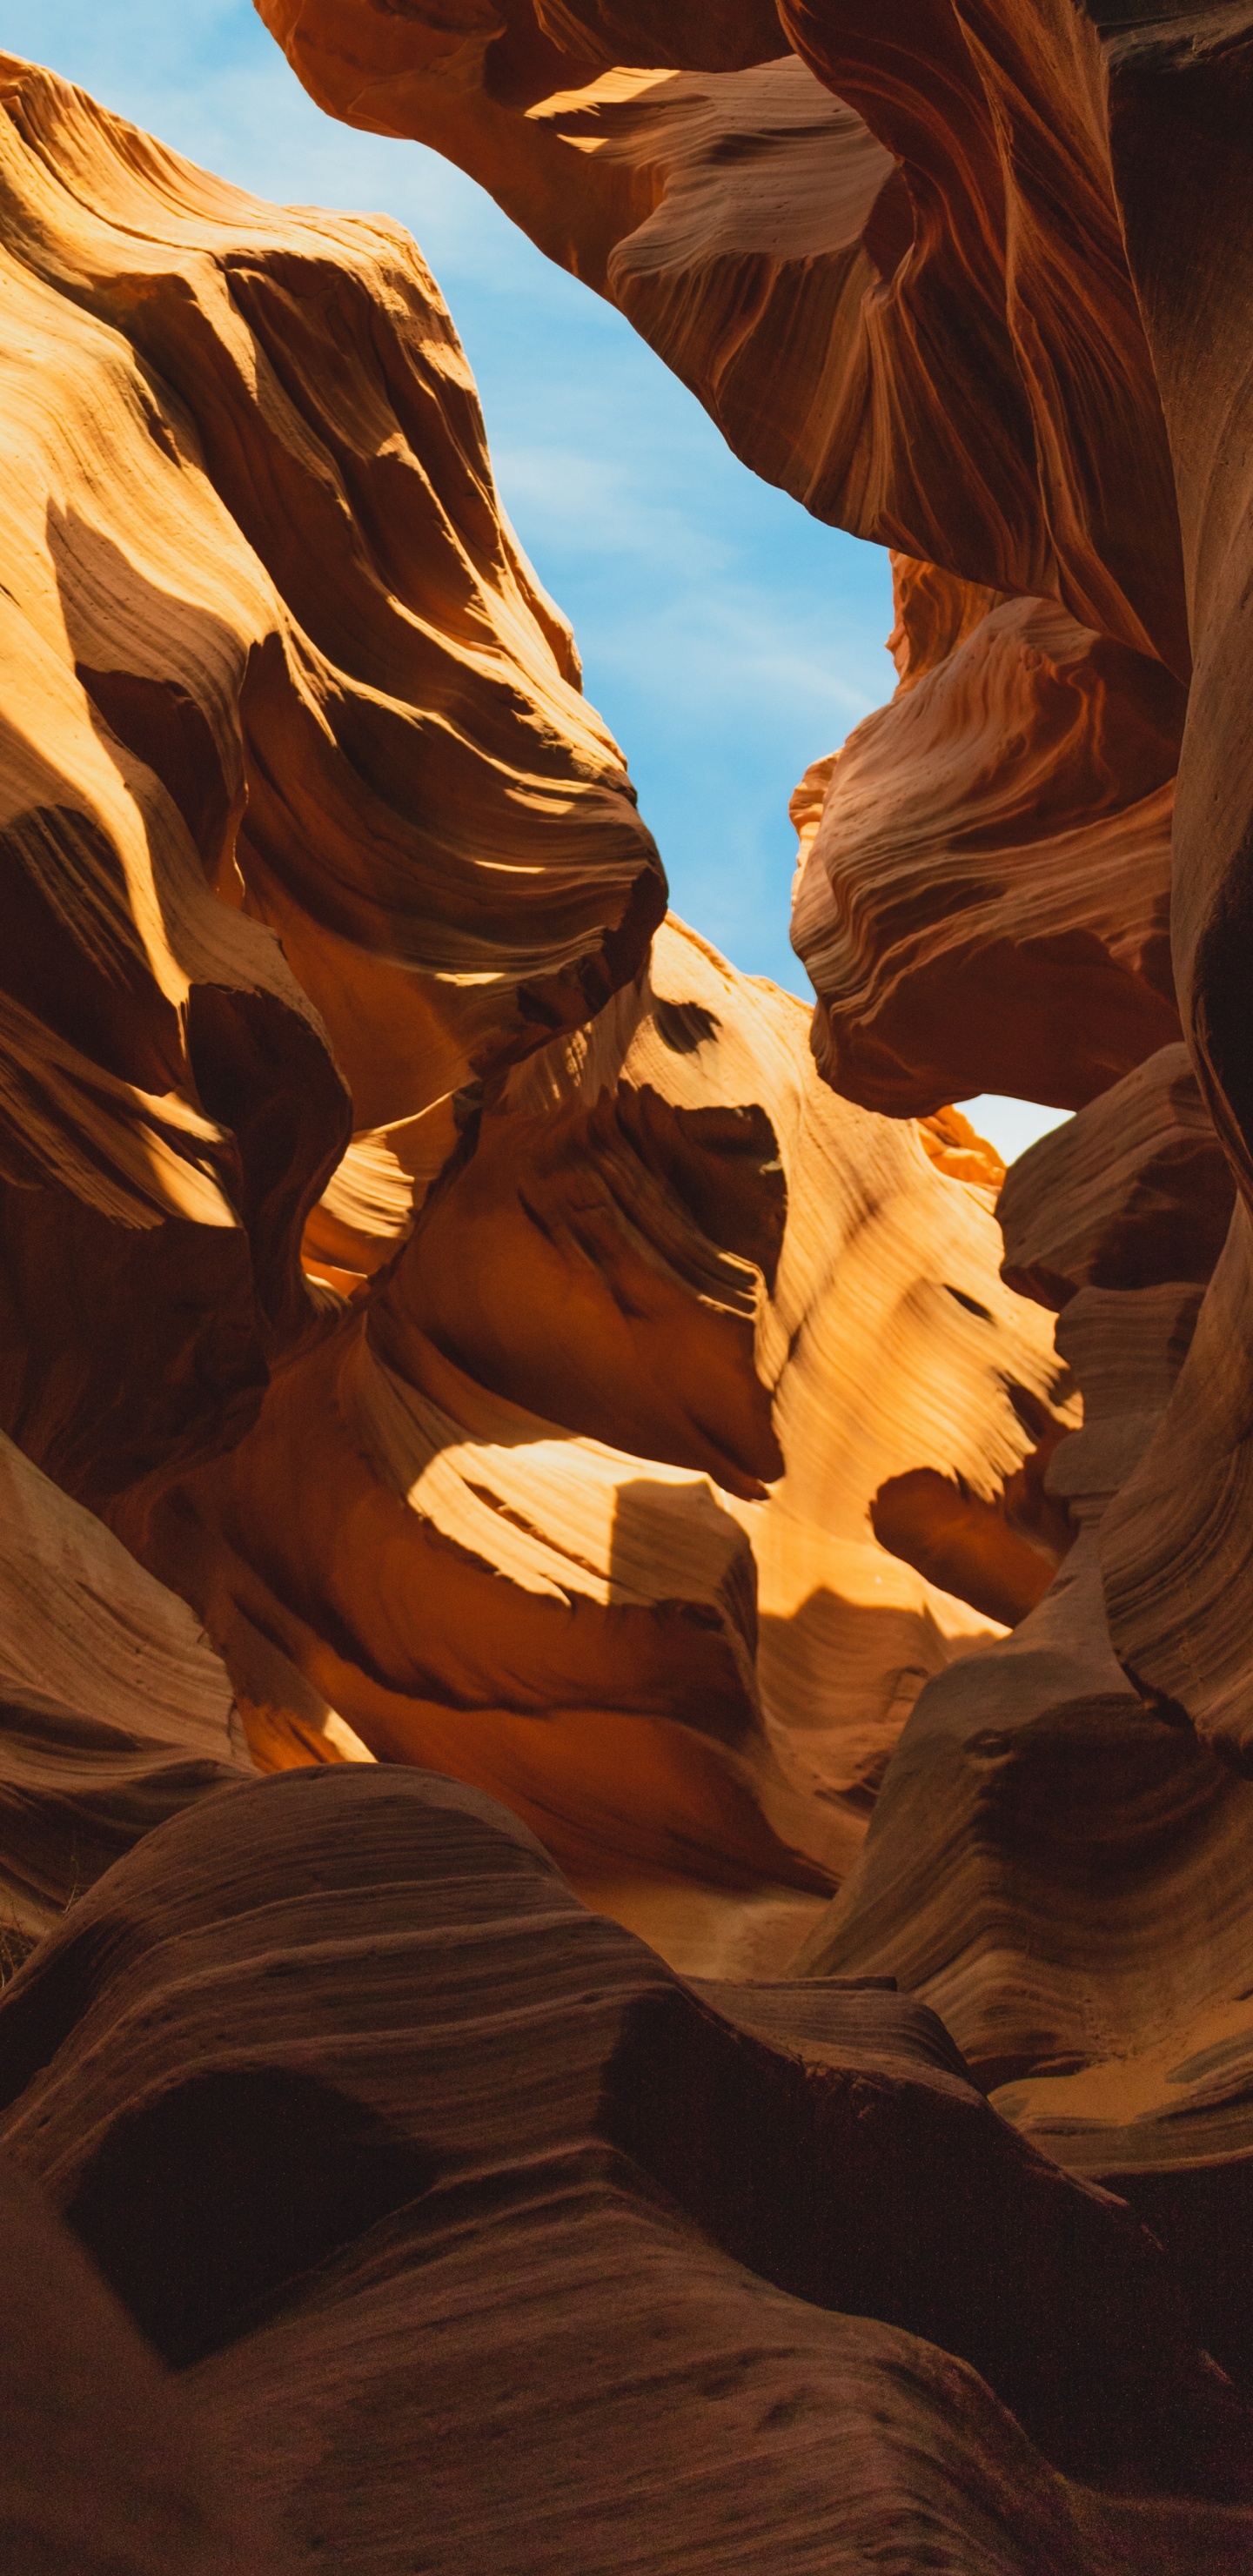 Brown Rock Formation During Daytime. Wallpaper in 1440x2960 Resolution